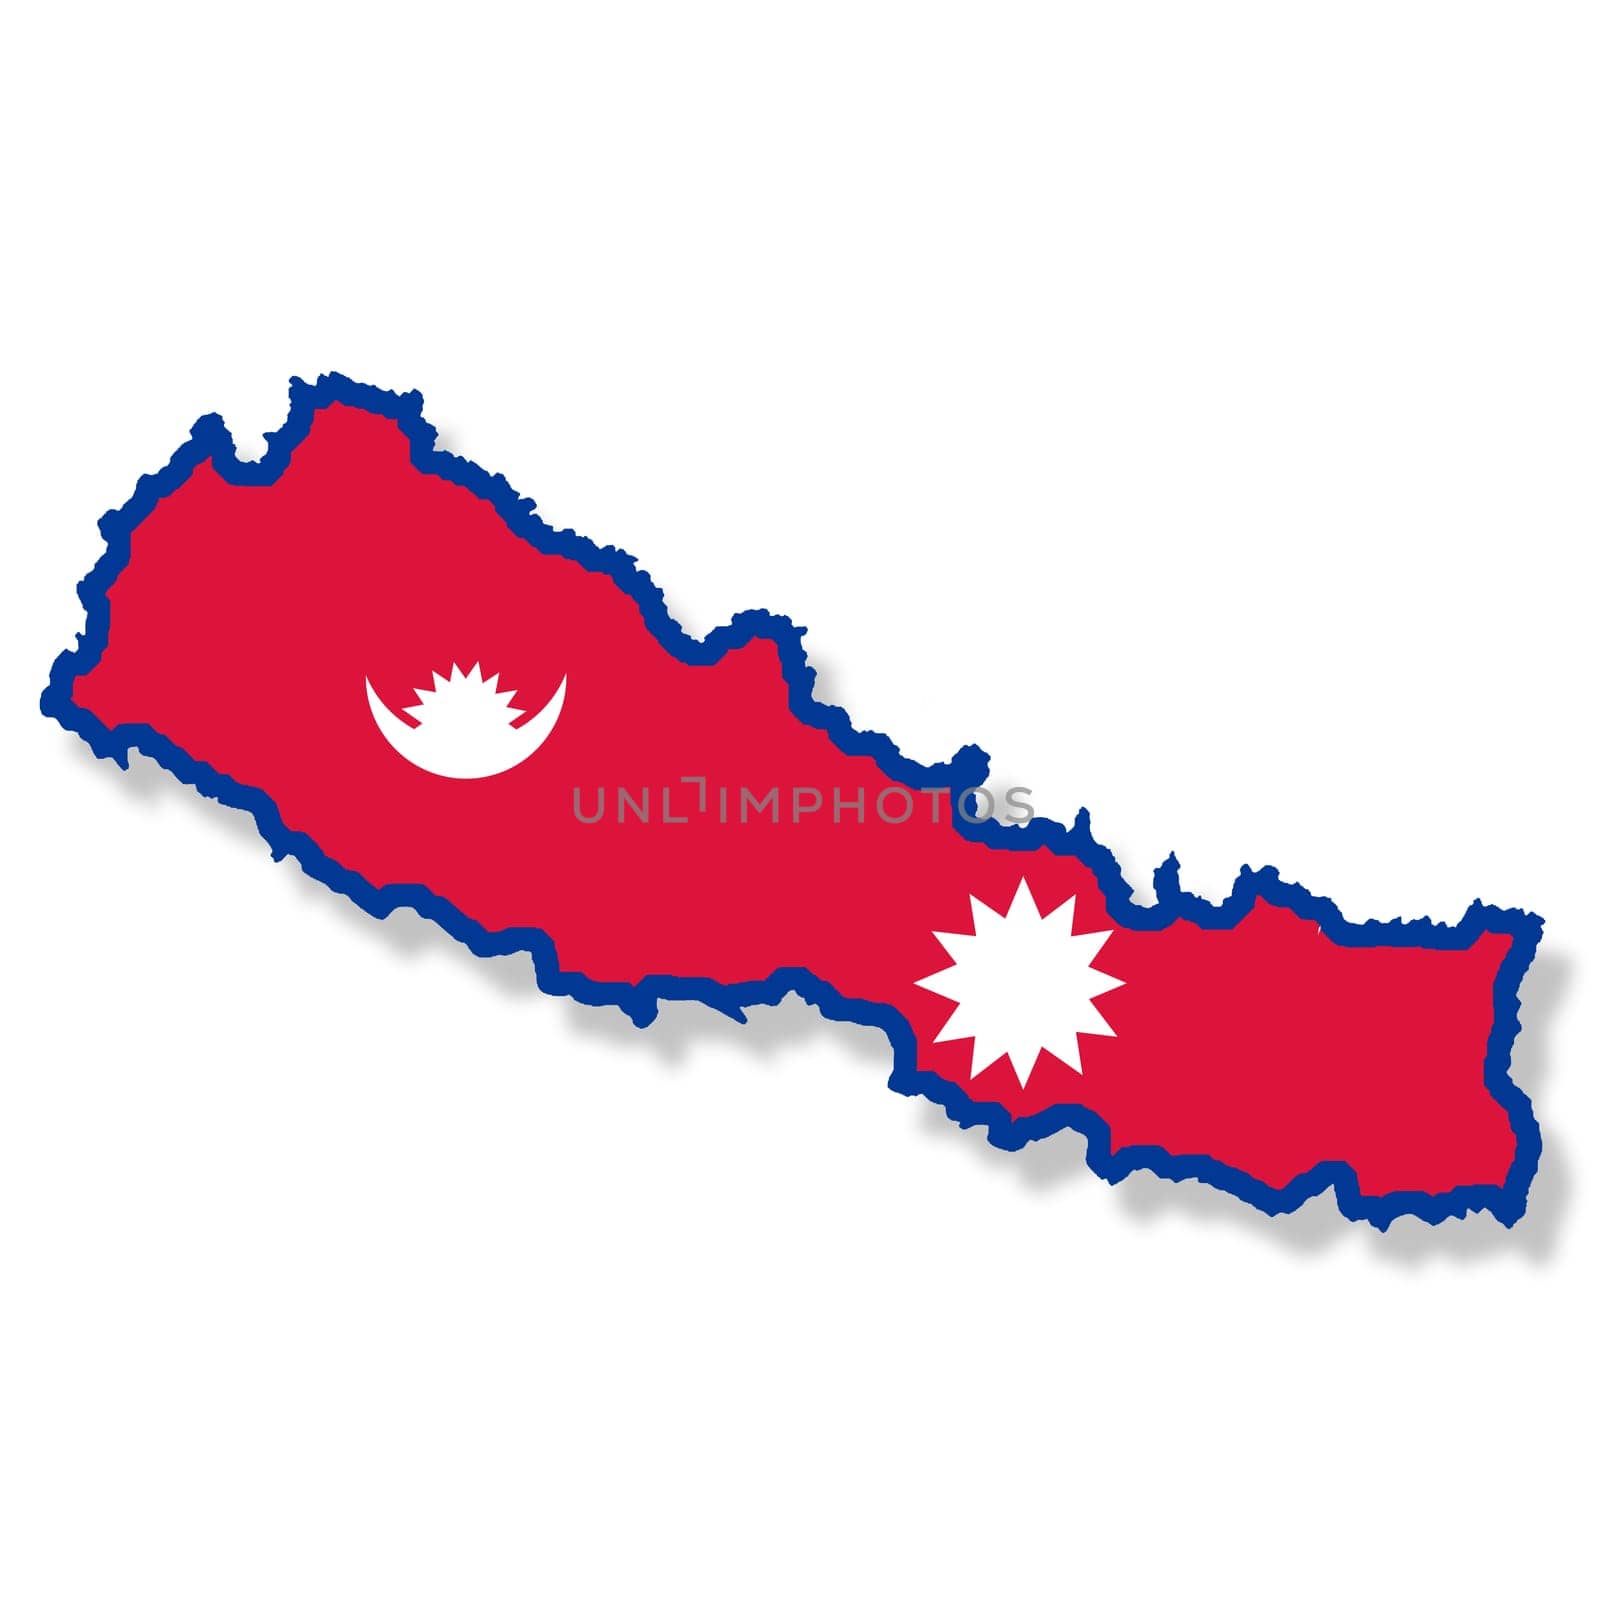 A Nepal flag map on white background with clipping path